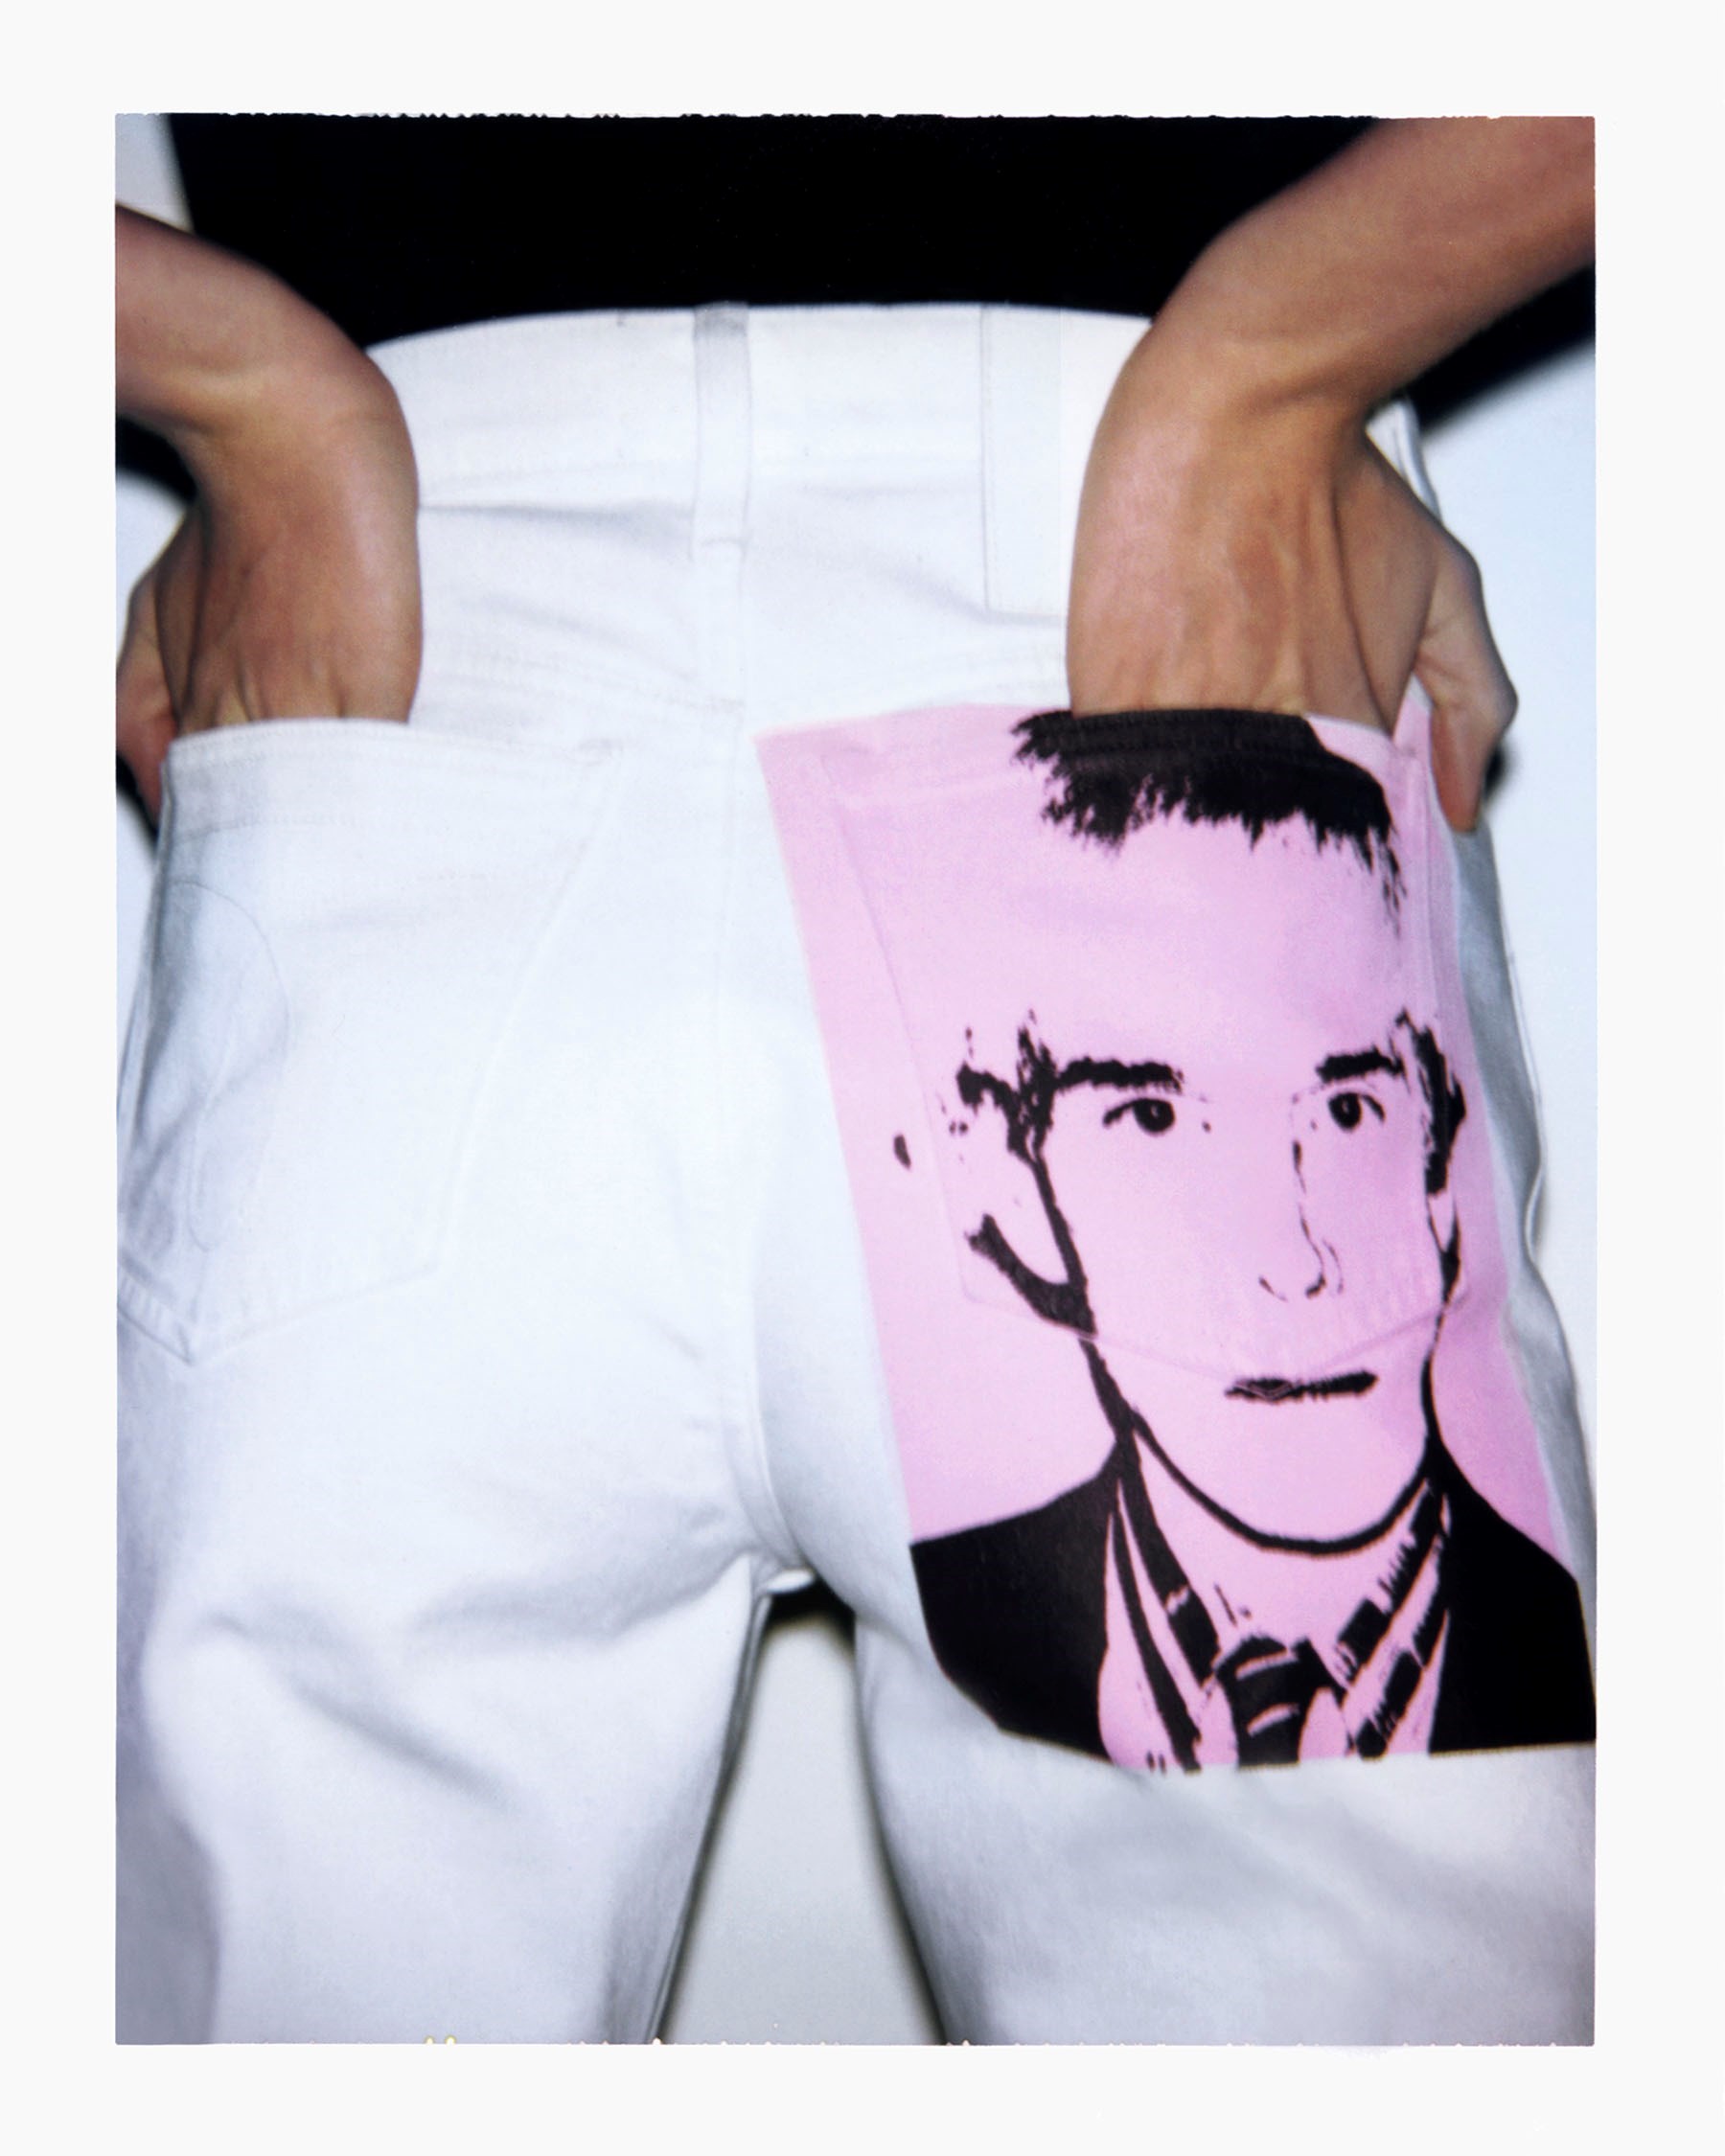 Andy Warhol is back in Calvin Klein's latest collection | Dazed